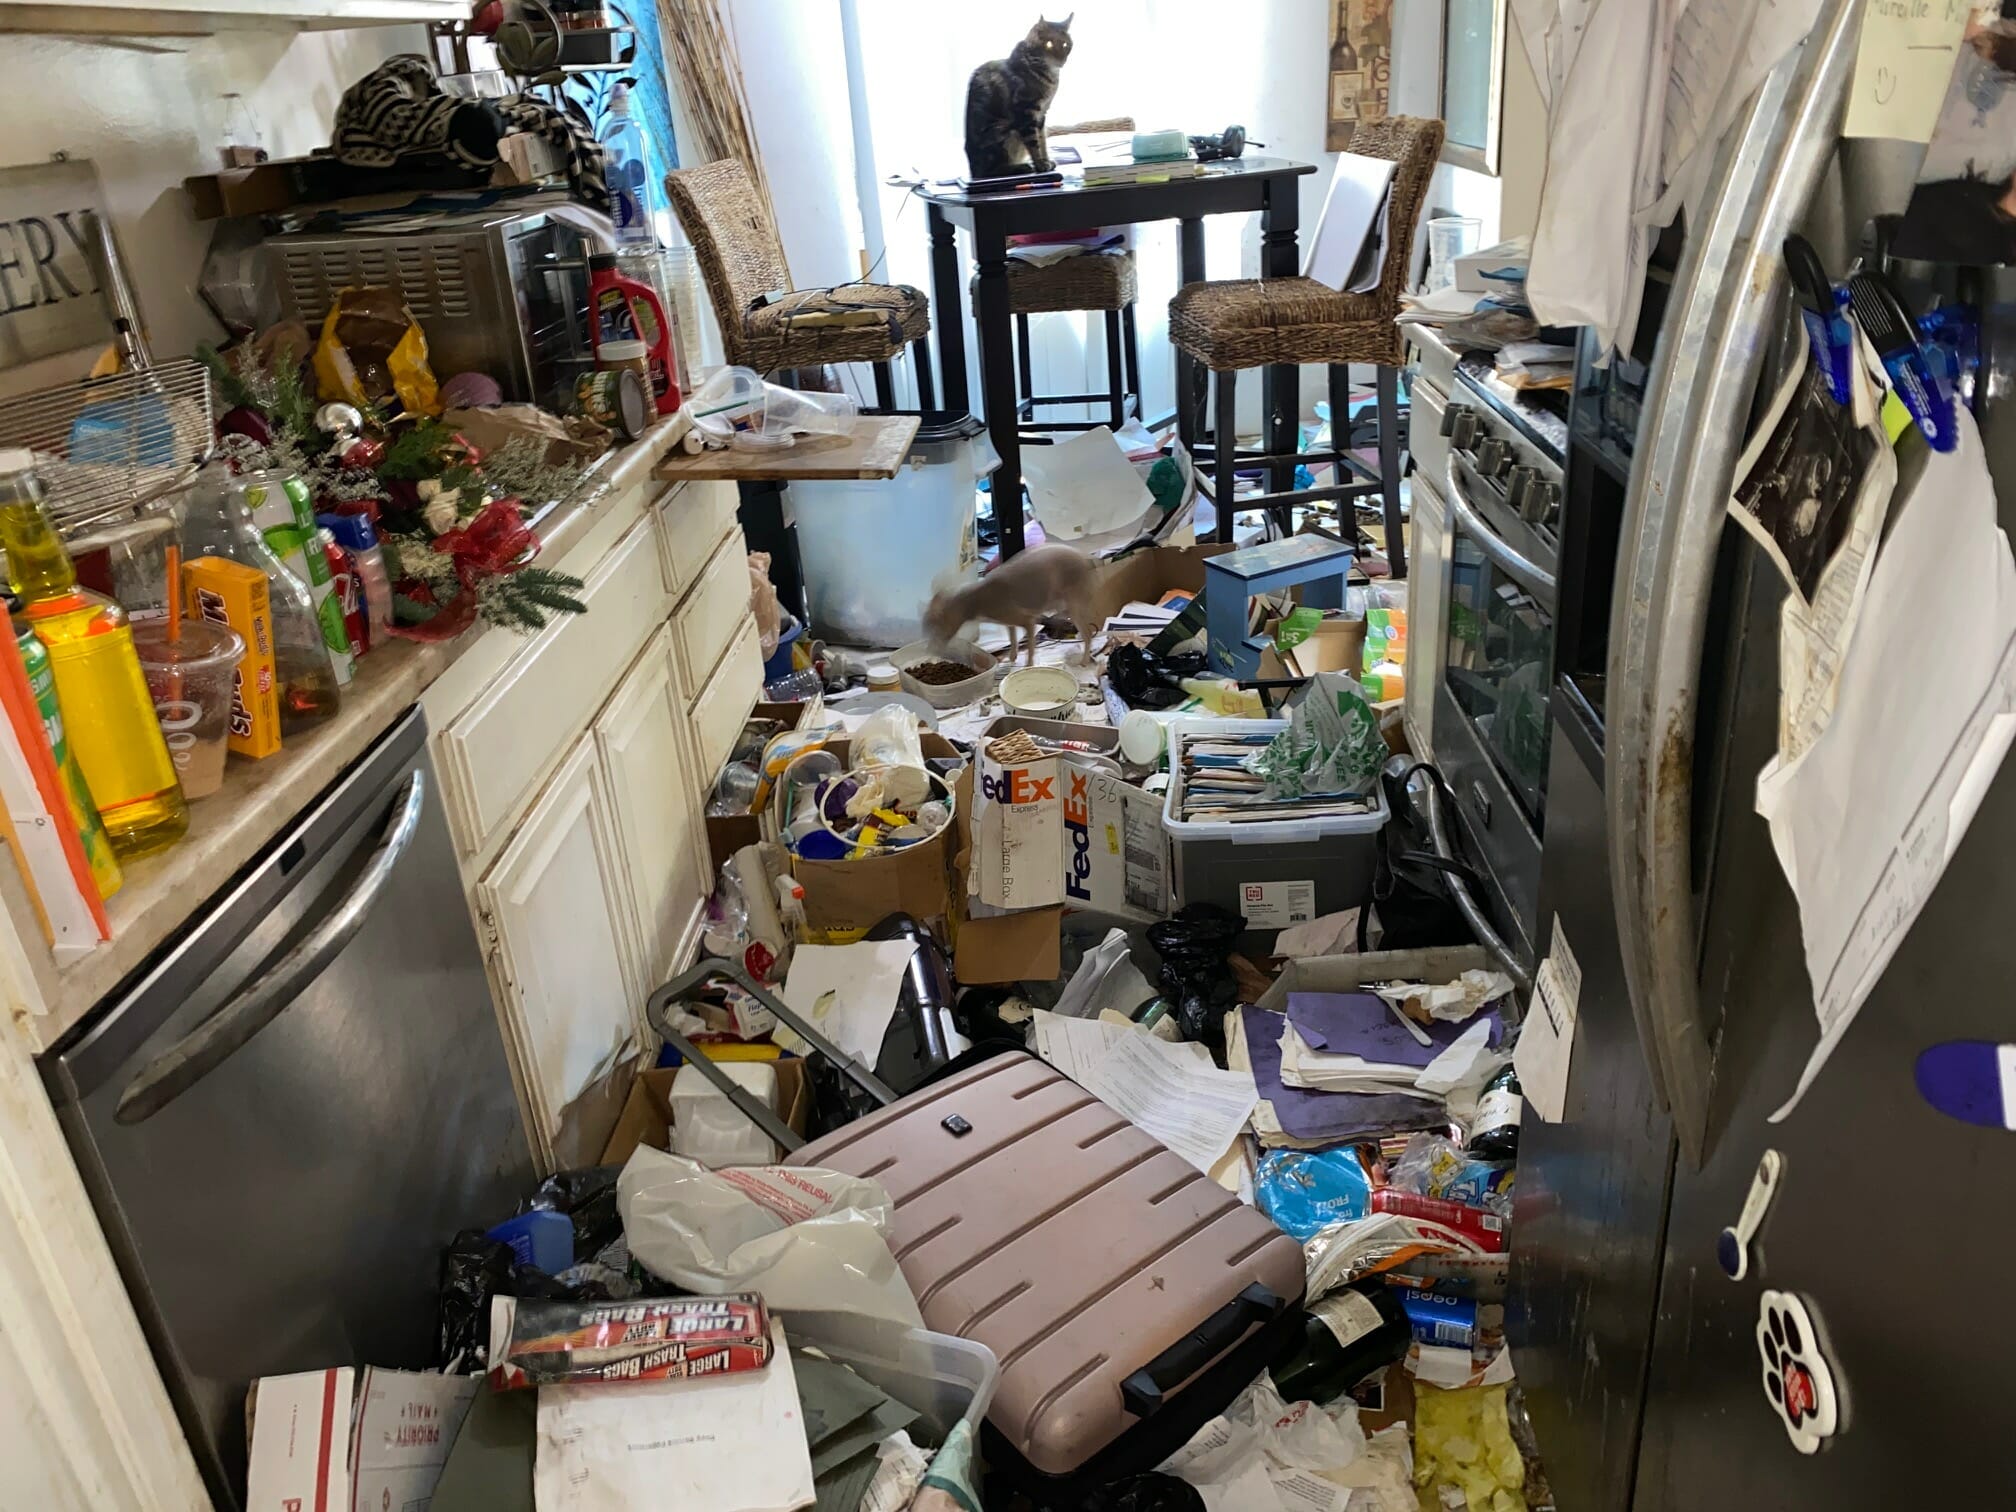 Kitchen area filled with clutter and trash. There is a cat in the back (sitting on the dinner table) and a squirrel lurking through the trash.